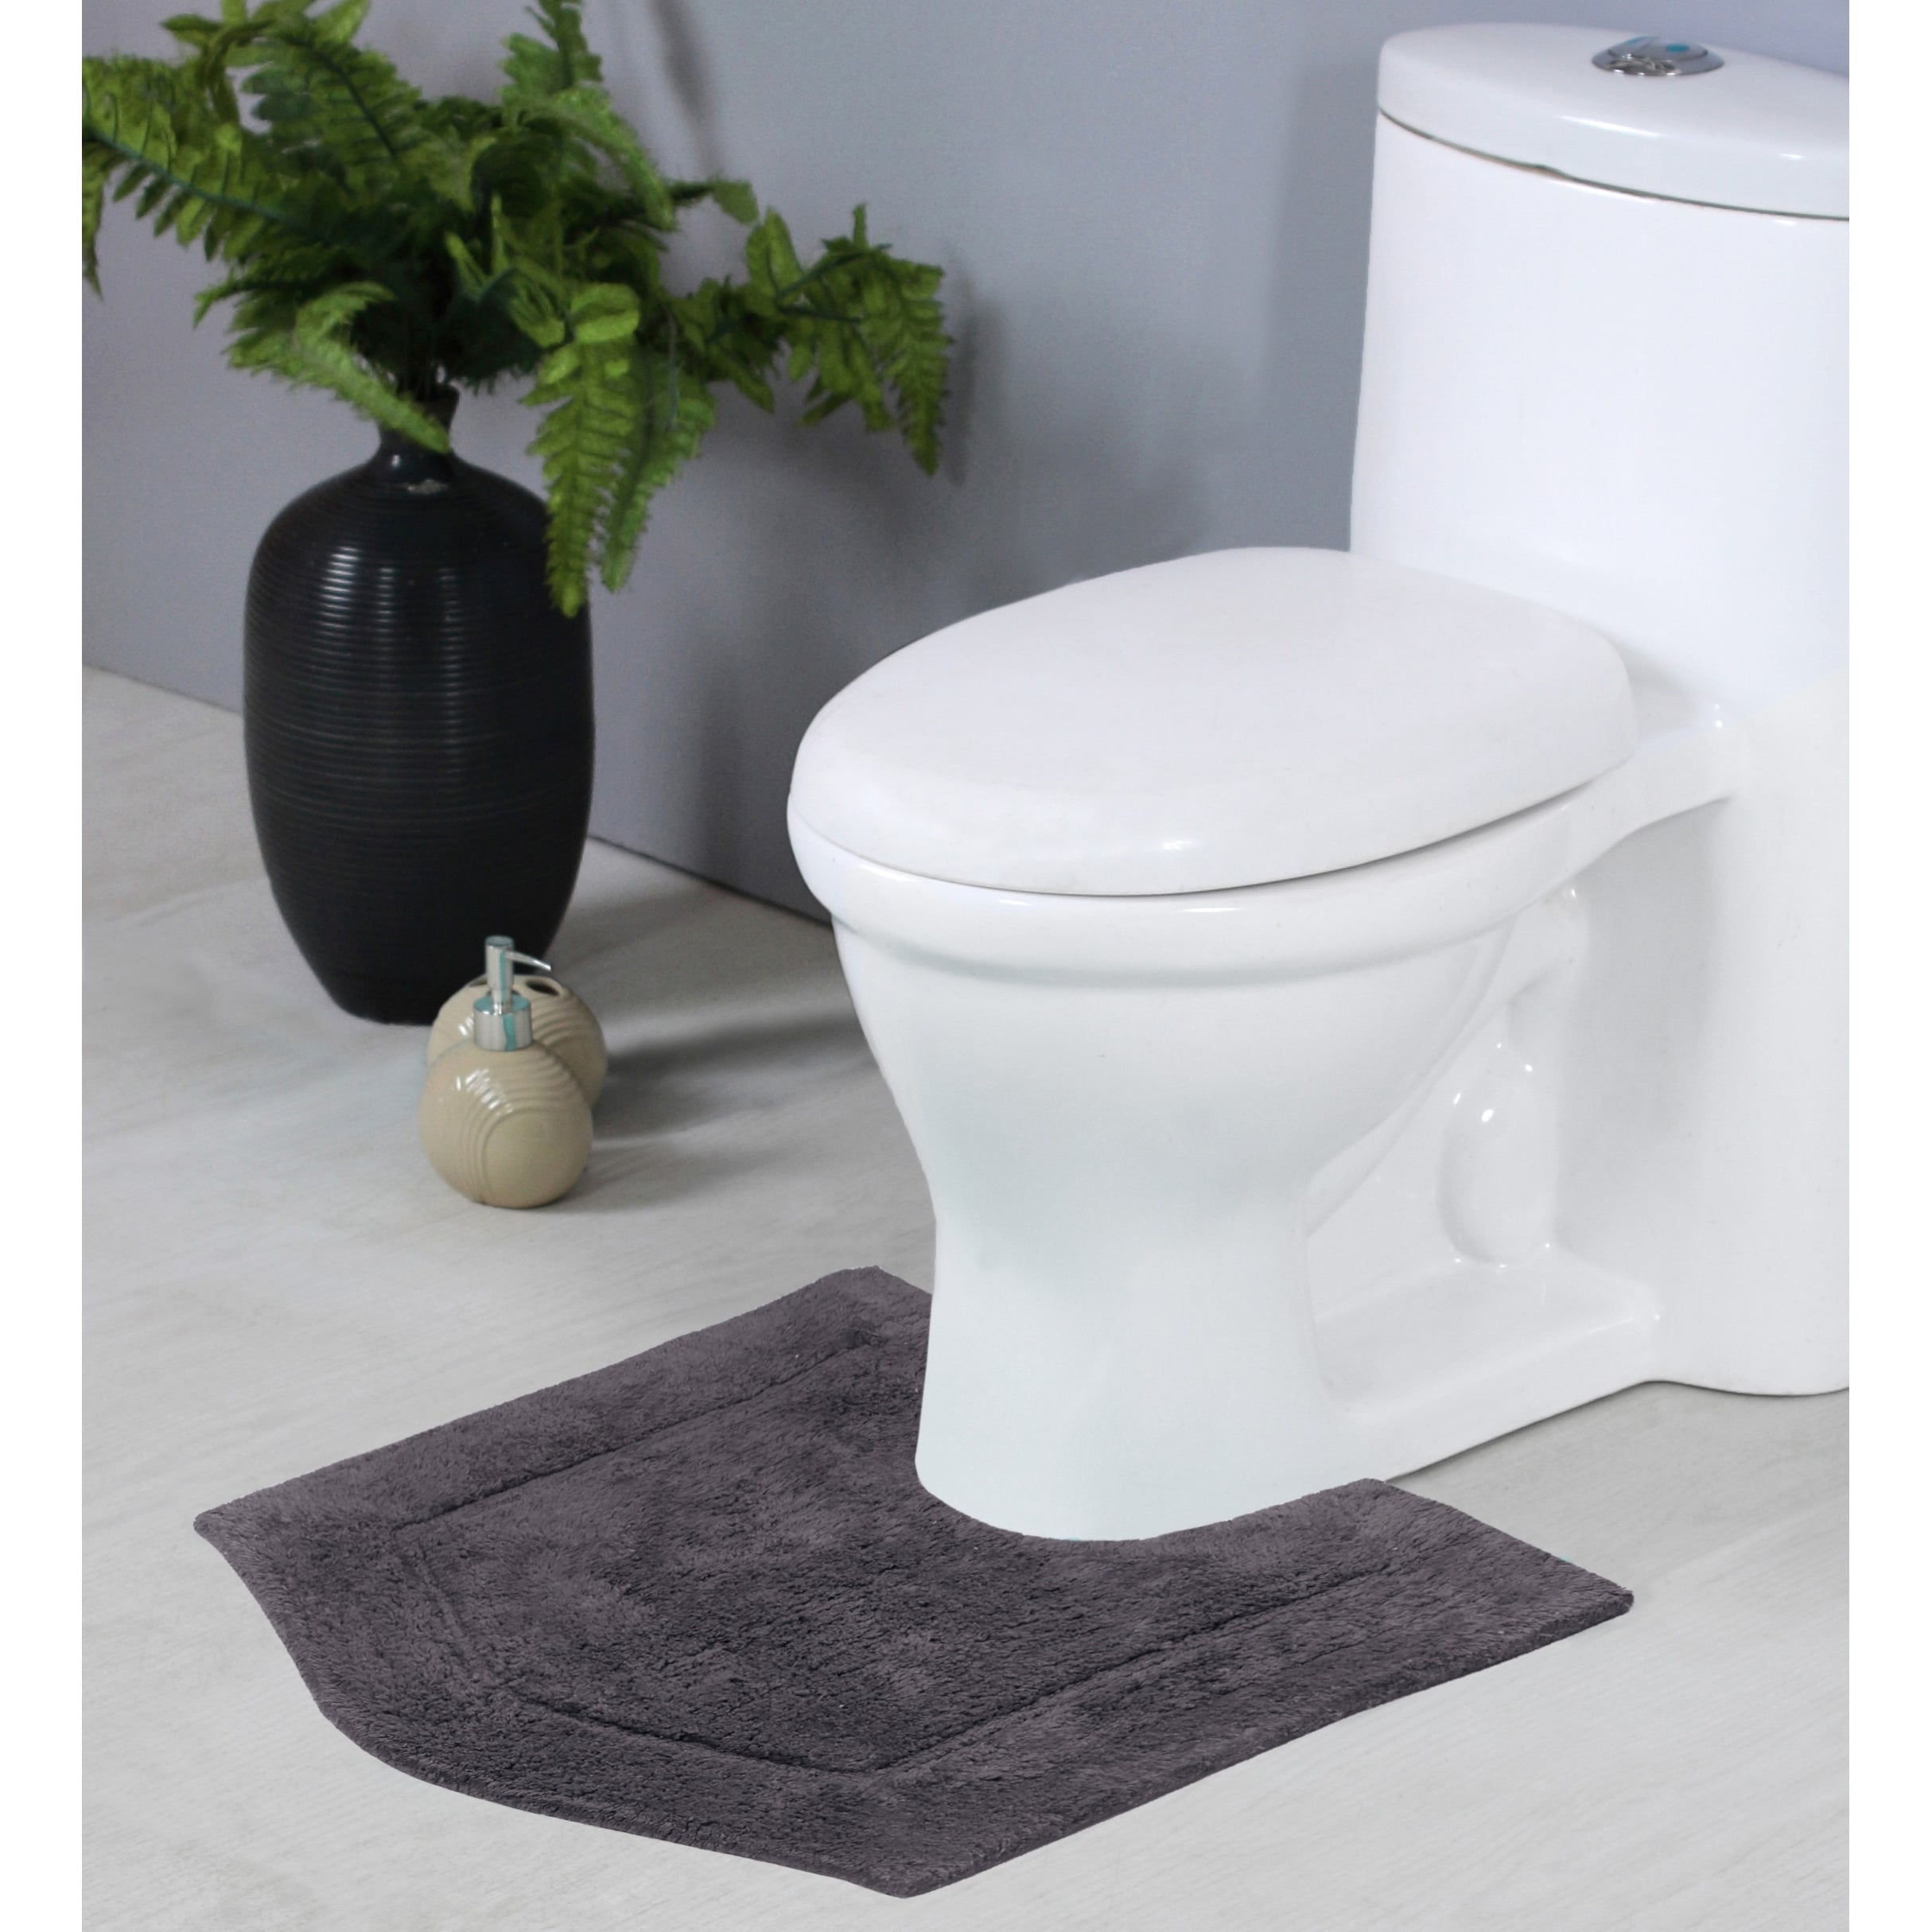 https://ak1.ostkcdn.com/images/products/is/images/direct/a440d54310c7b1ff5d9ab8c371d2ce9a53100109/Home-Weavers-WatreFord-Collection-Thick-Toilet-Bath-Rugs-U-Shaped-Contour-Non-Slip-Cotton-Soft-Absorbe-Machine-Washable-20%22x20%22.jpg